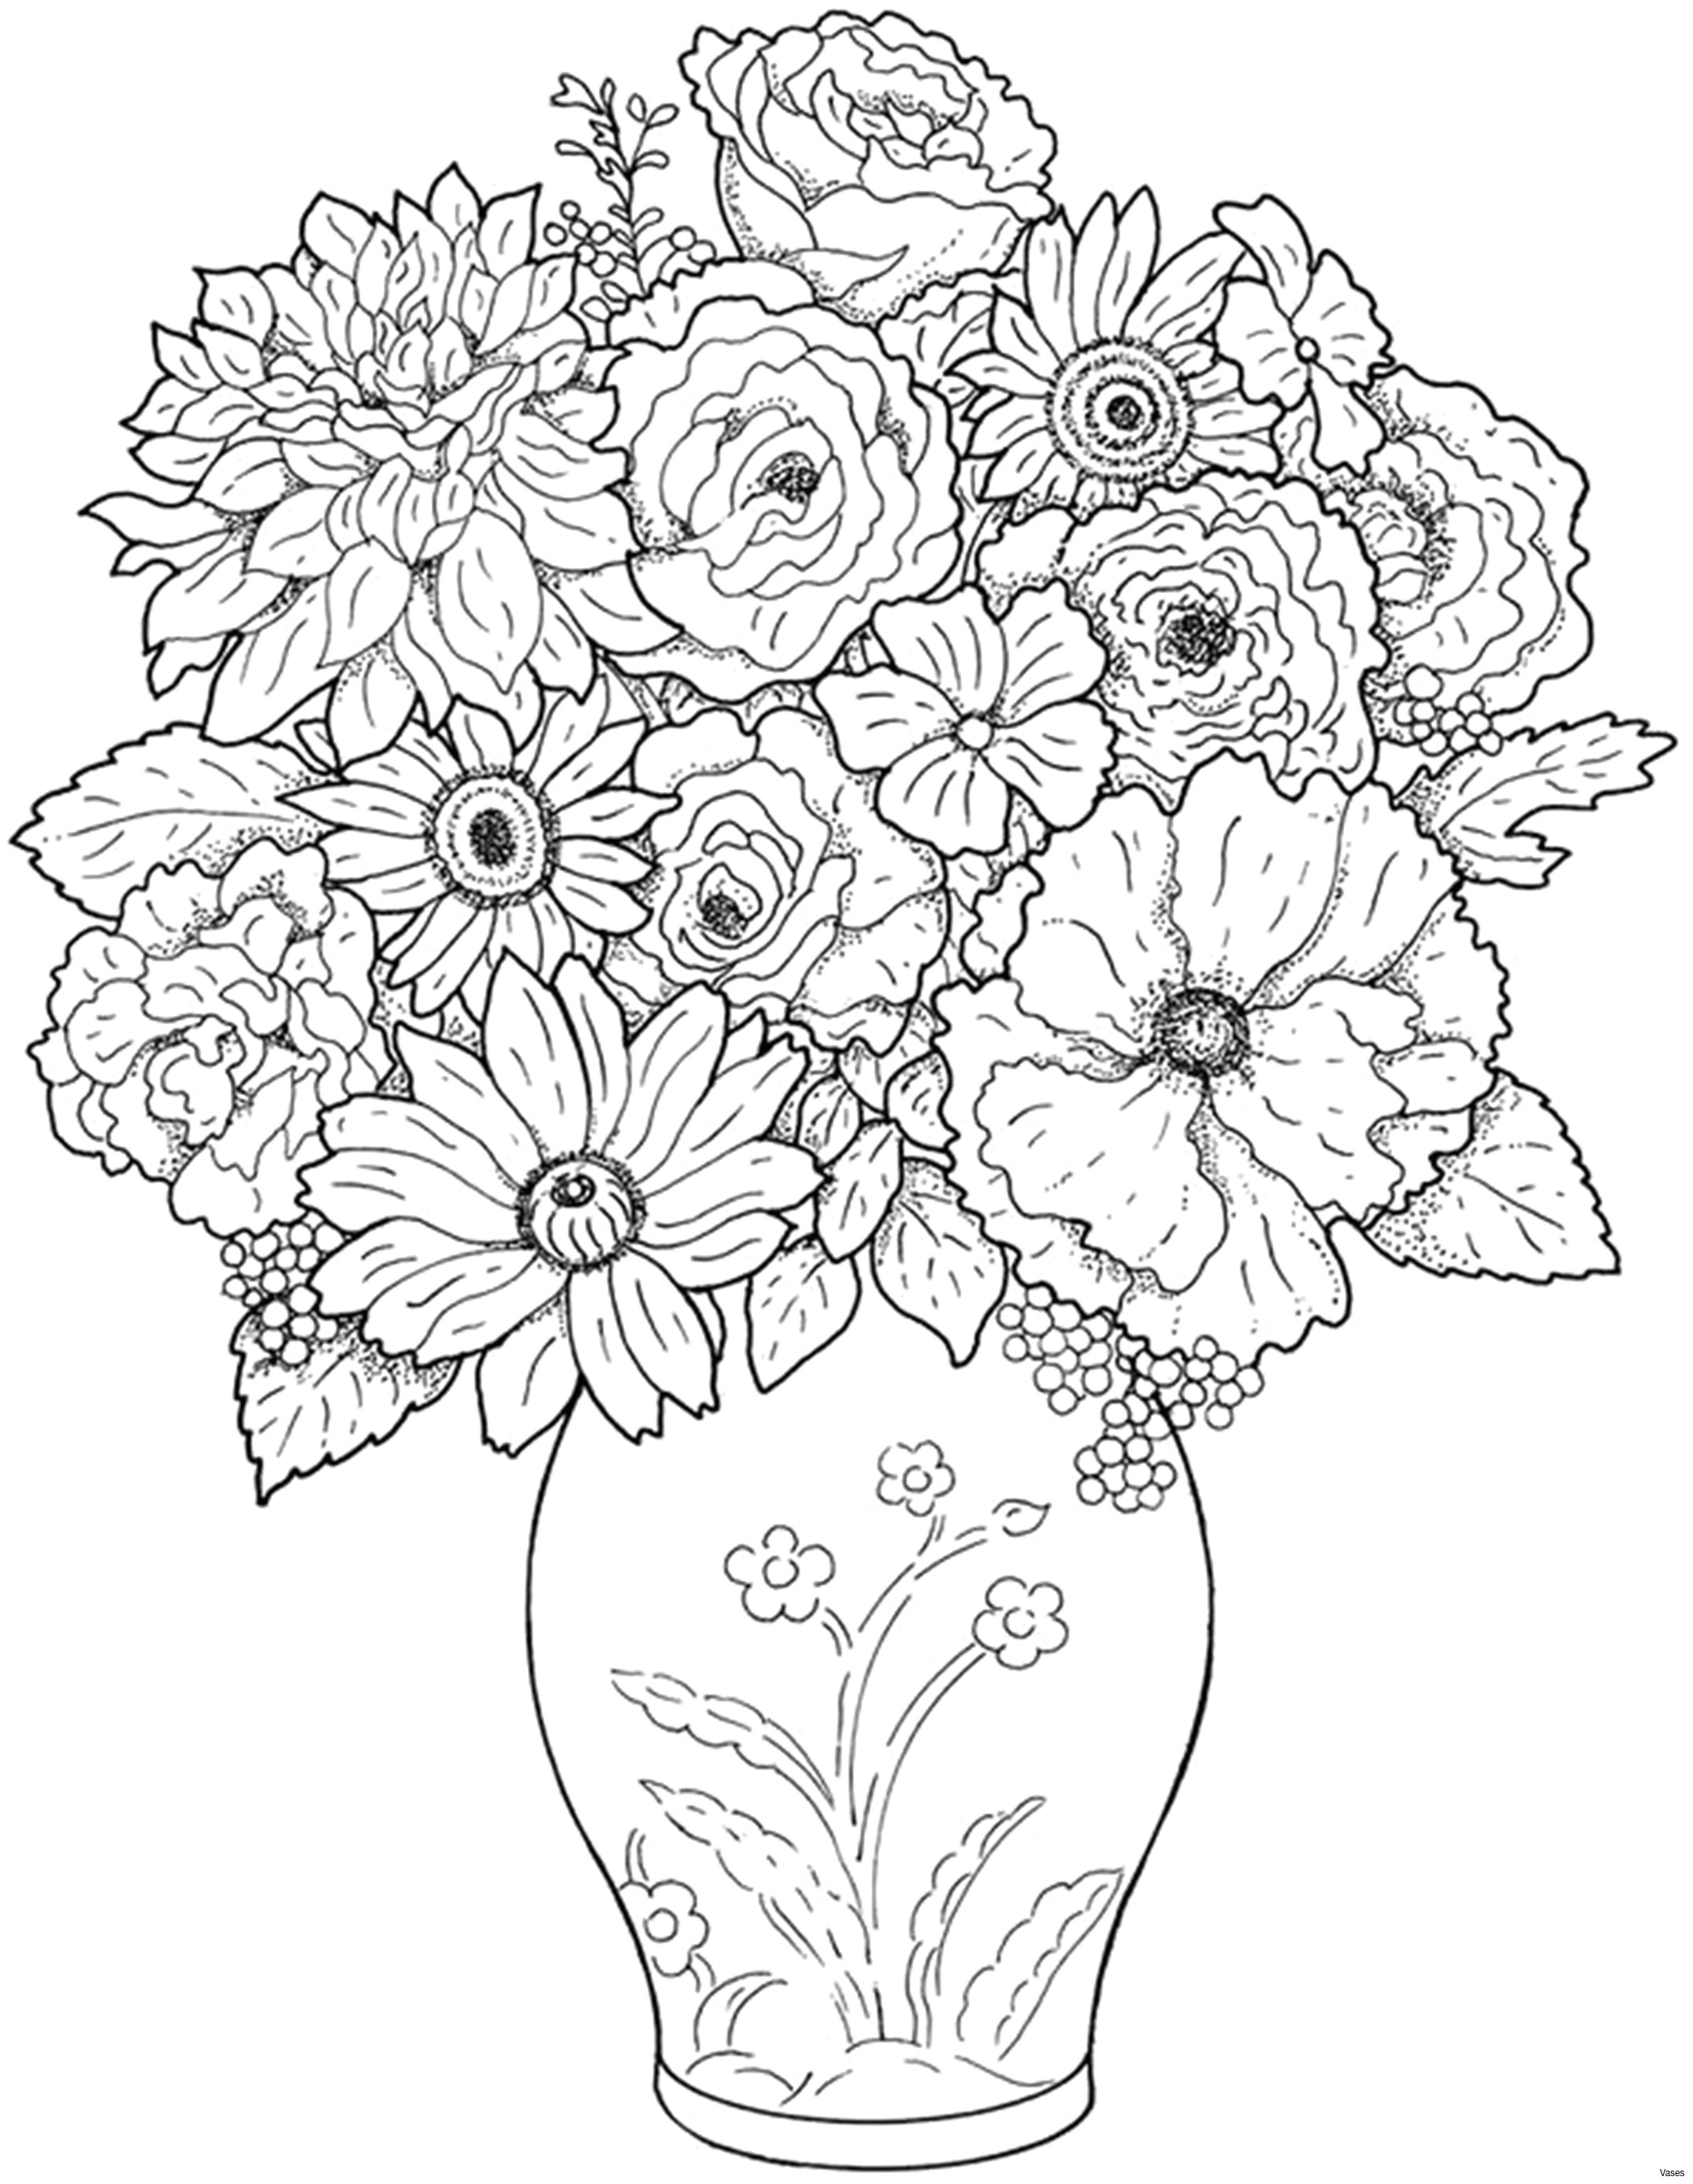 Drawing Of Flower Vase for Kid Coloring Pictures Of Plants New Cool Vases Flower Vase Coloring Page